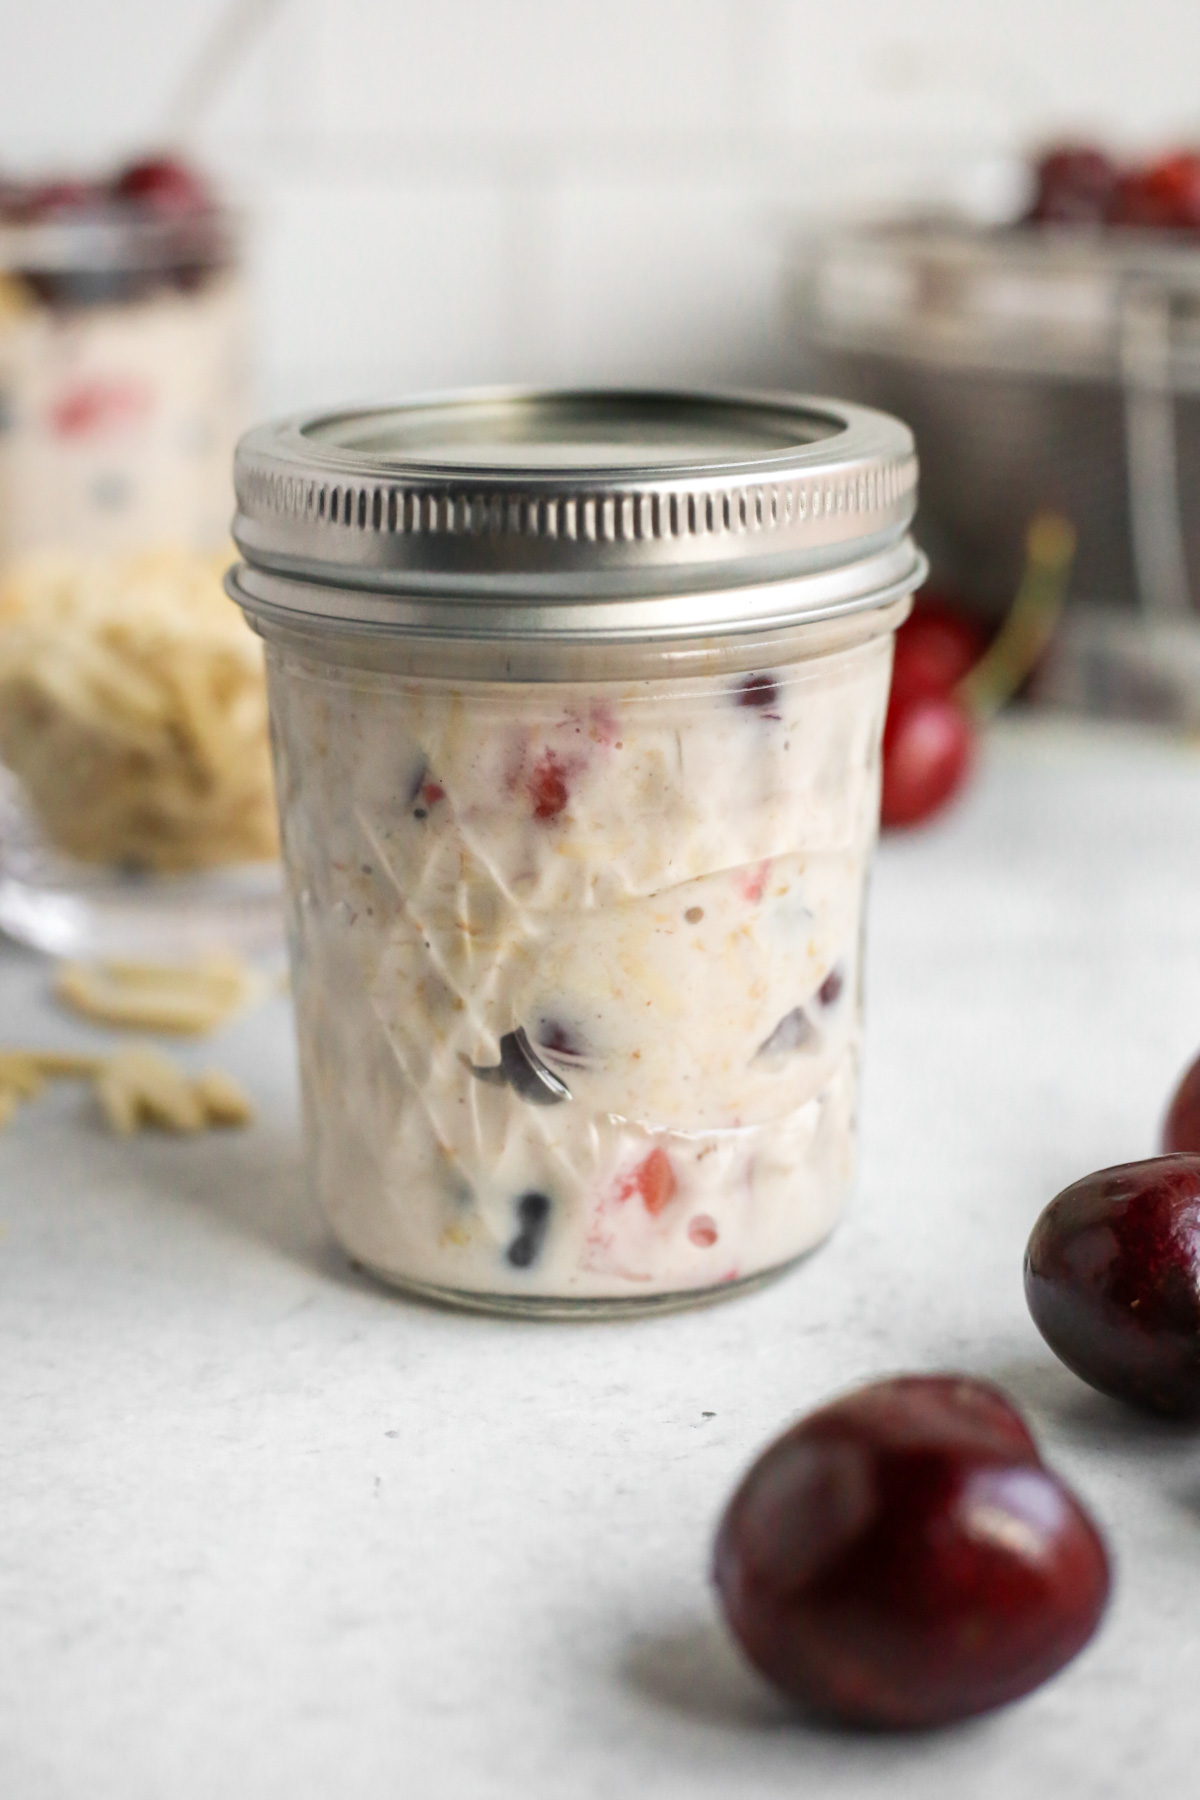 A small mason jar with the lid fastened sits on a kitchen countertop. It's filled with Berry Cherry Almond Overnight Oats, with pieces of the colorful fruit visible in the mixture